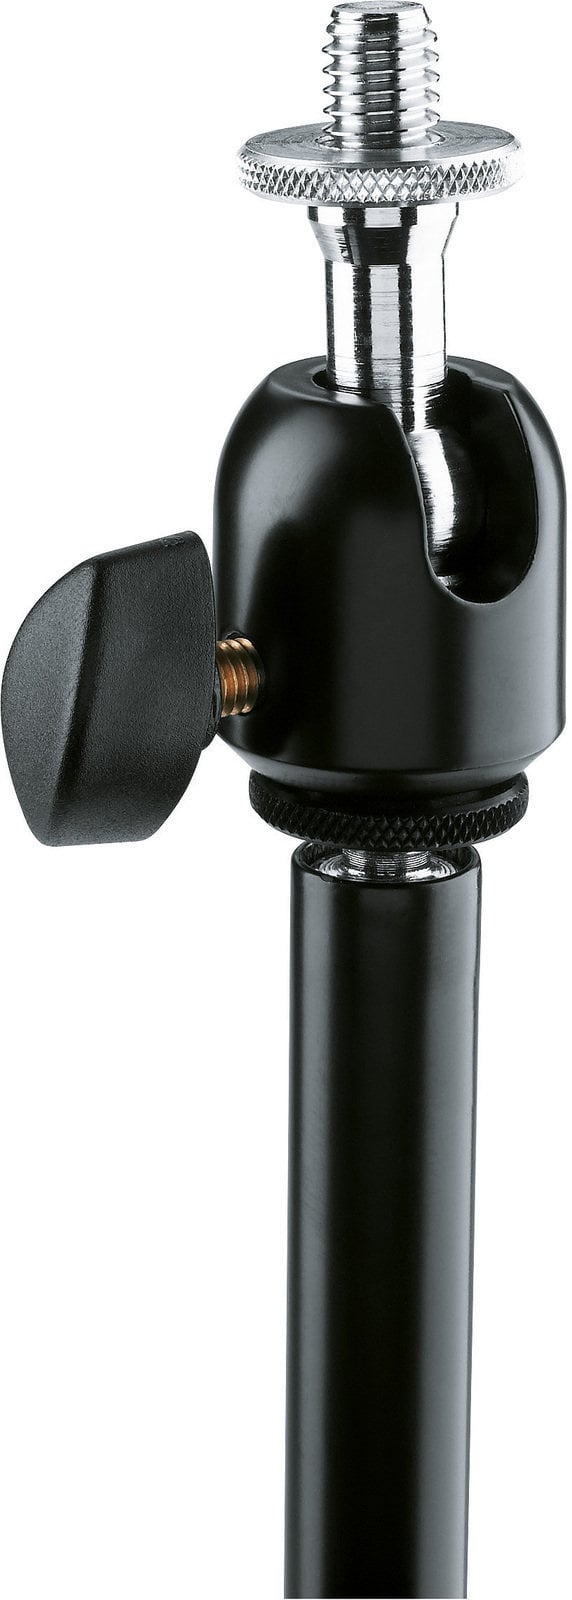 Accessory for microphone stand Konig & Meyer 19695 Universal 3/8'' Accessory for microphone stand